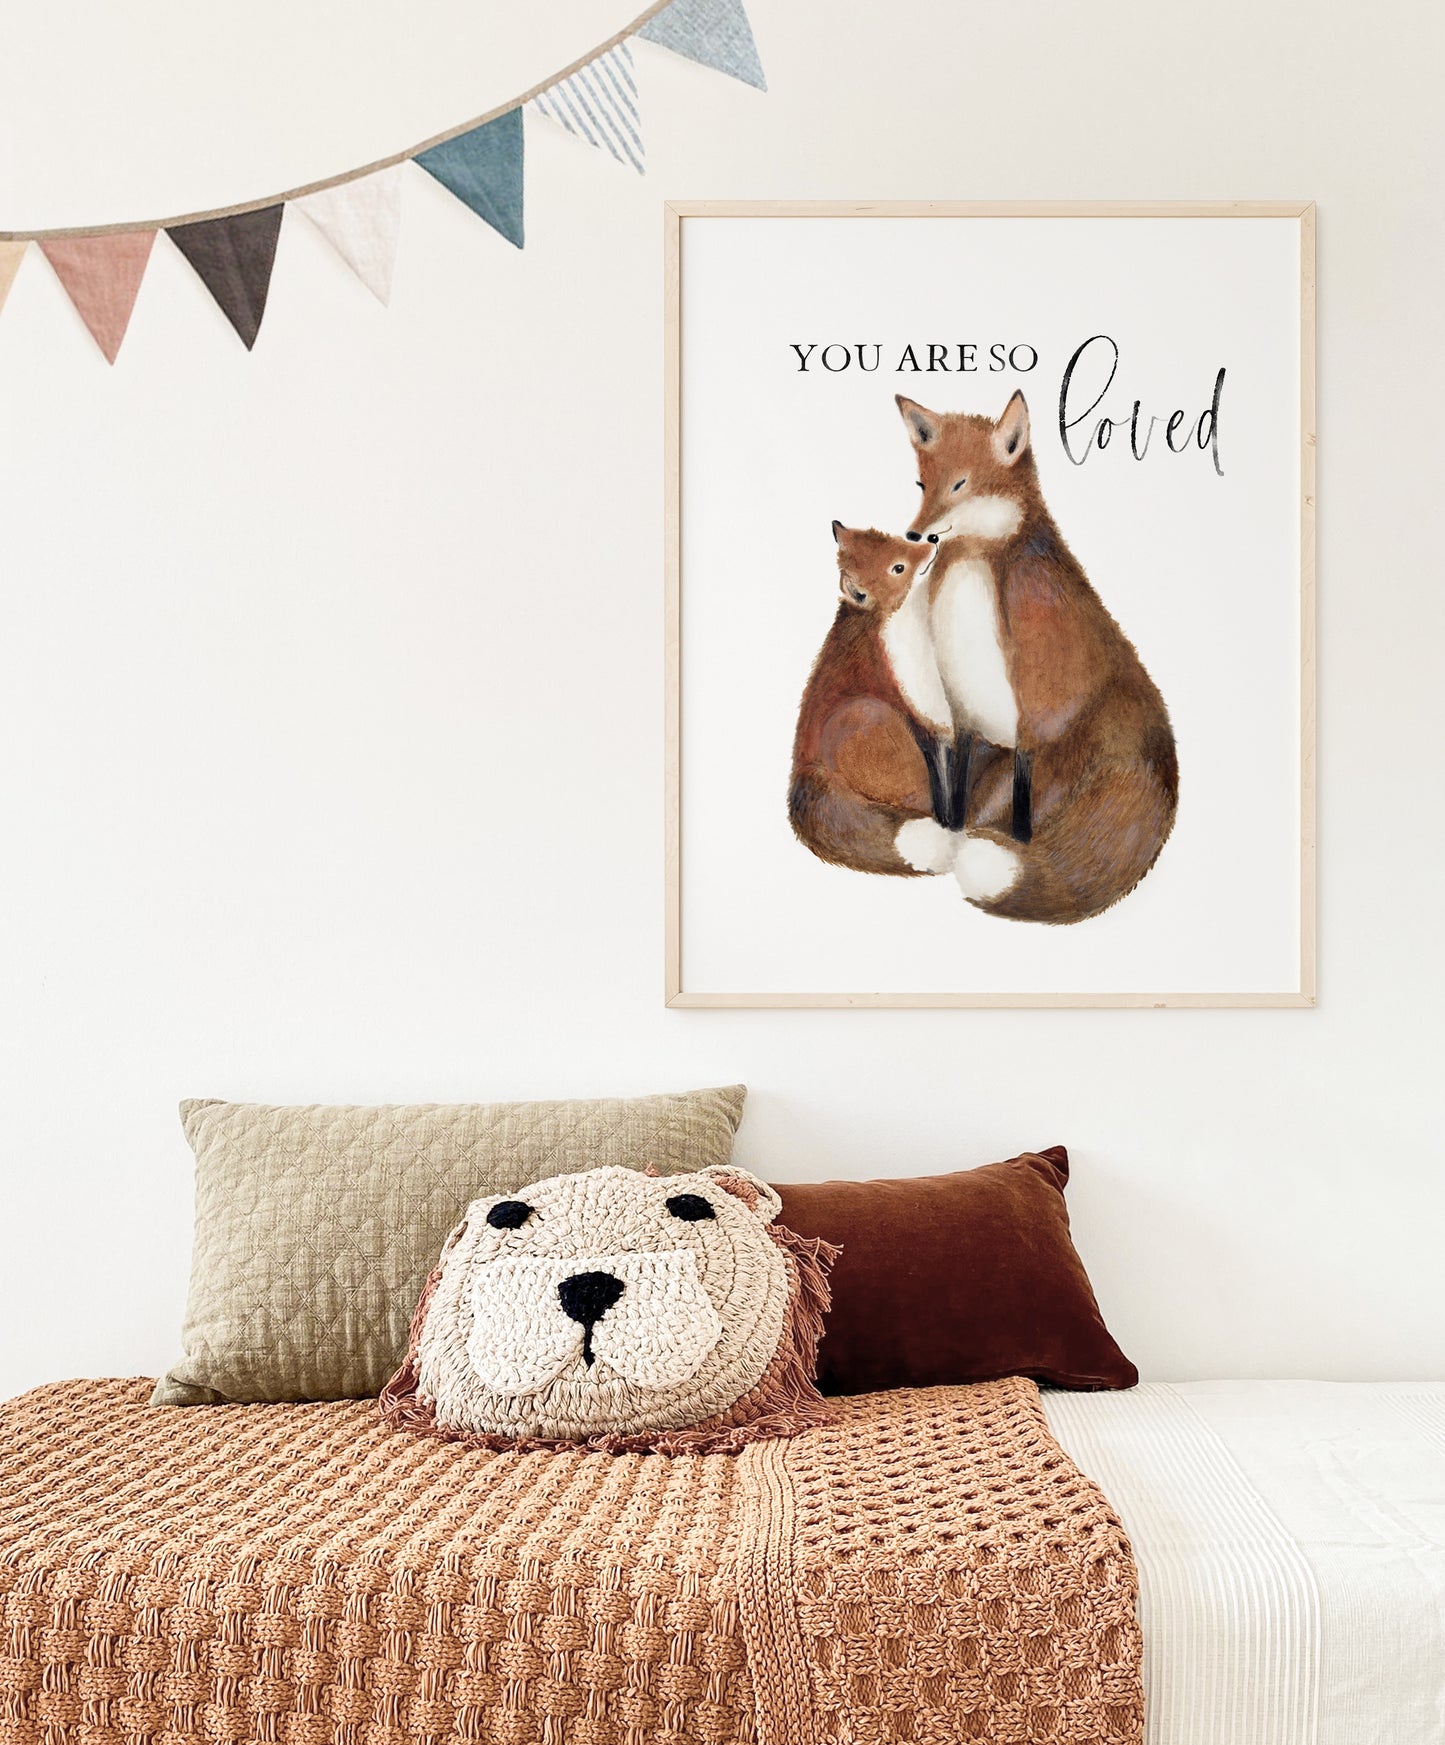 Artwork painting of a mother and baby fox with the words You are So Loved. The artwork is on a plain white background and is framed in a light wood frame. The picture hangs on a light colored wall over a child's bed.  Art by Studio Q - Art by Nicky Quartermaine Scott